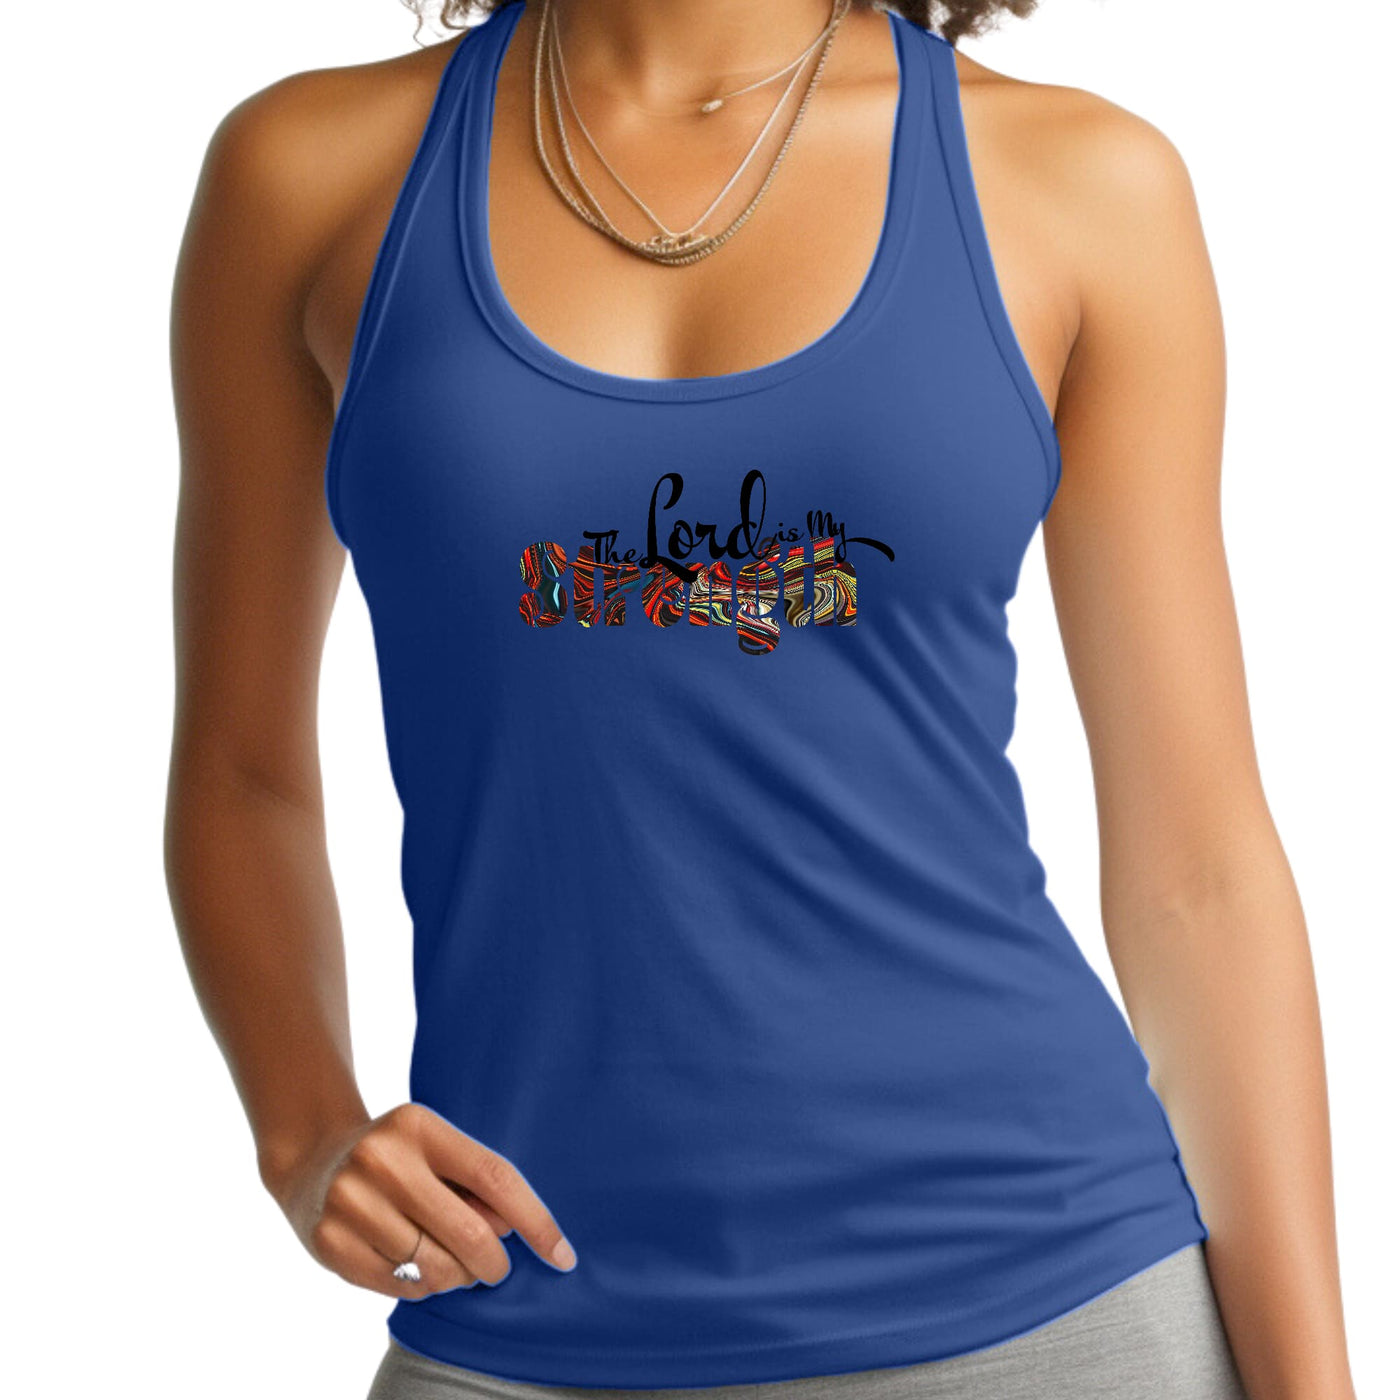 Womens Fitness Tank Top Graphic T-shirt The Lord Is My Strength Print - Womens